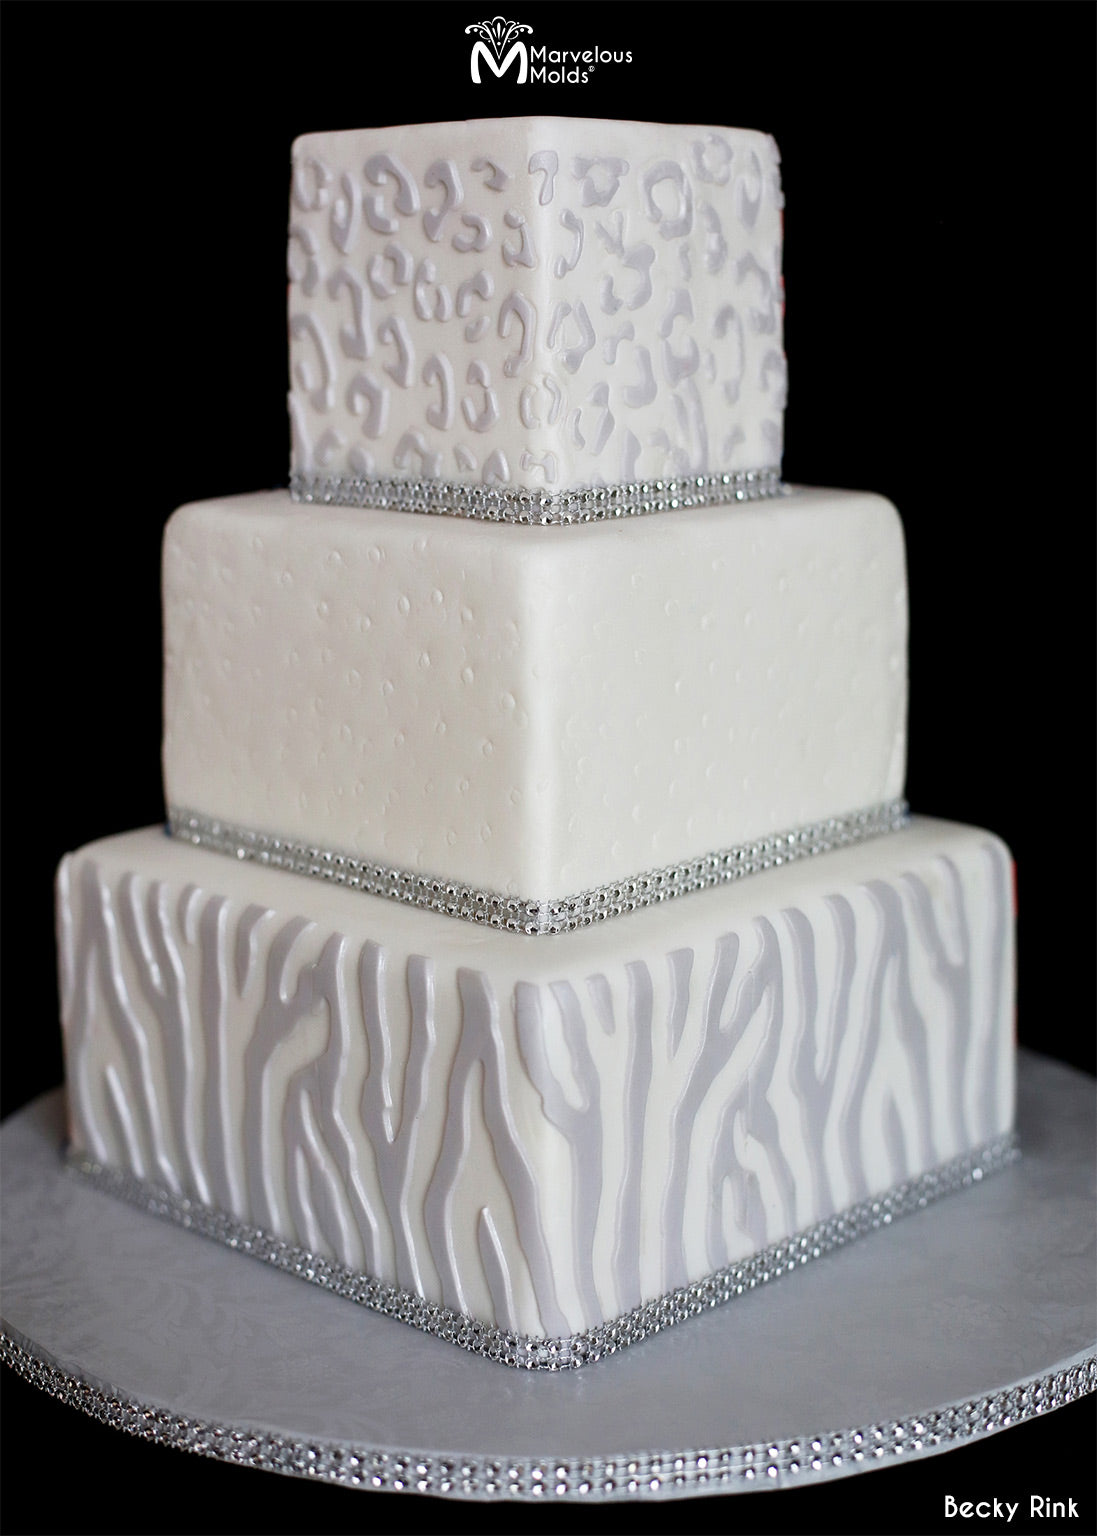 Animal Print Wedding Cake Decorated Using the Zebra Silicone Onlay Mold by Marvelous Molds